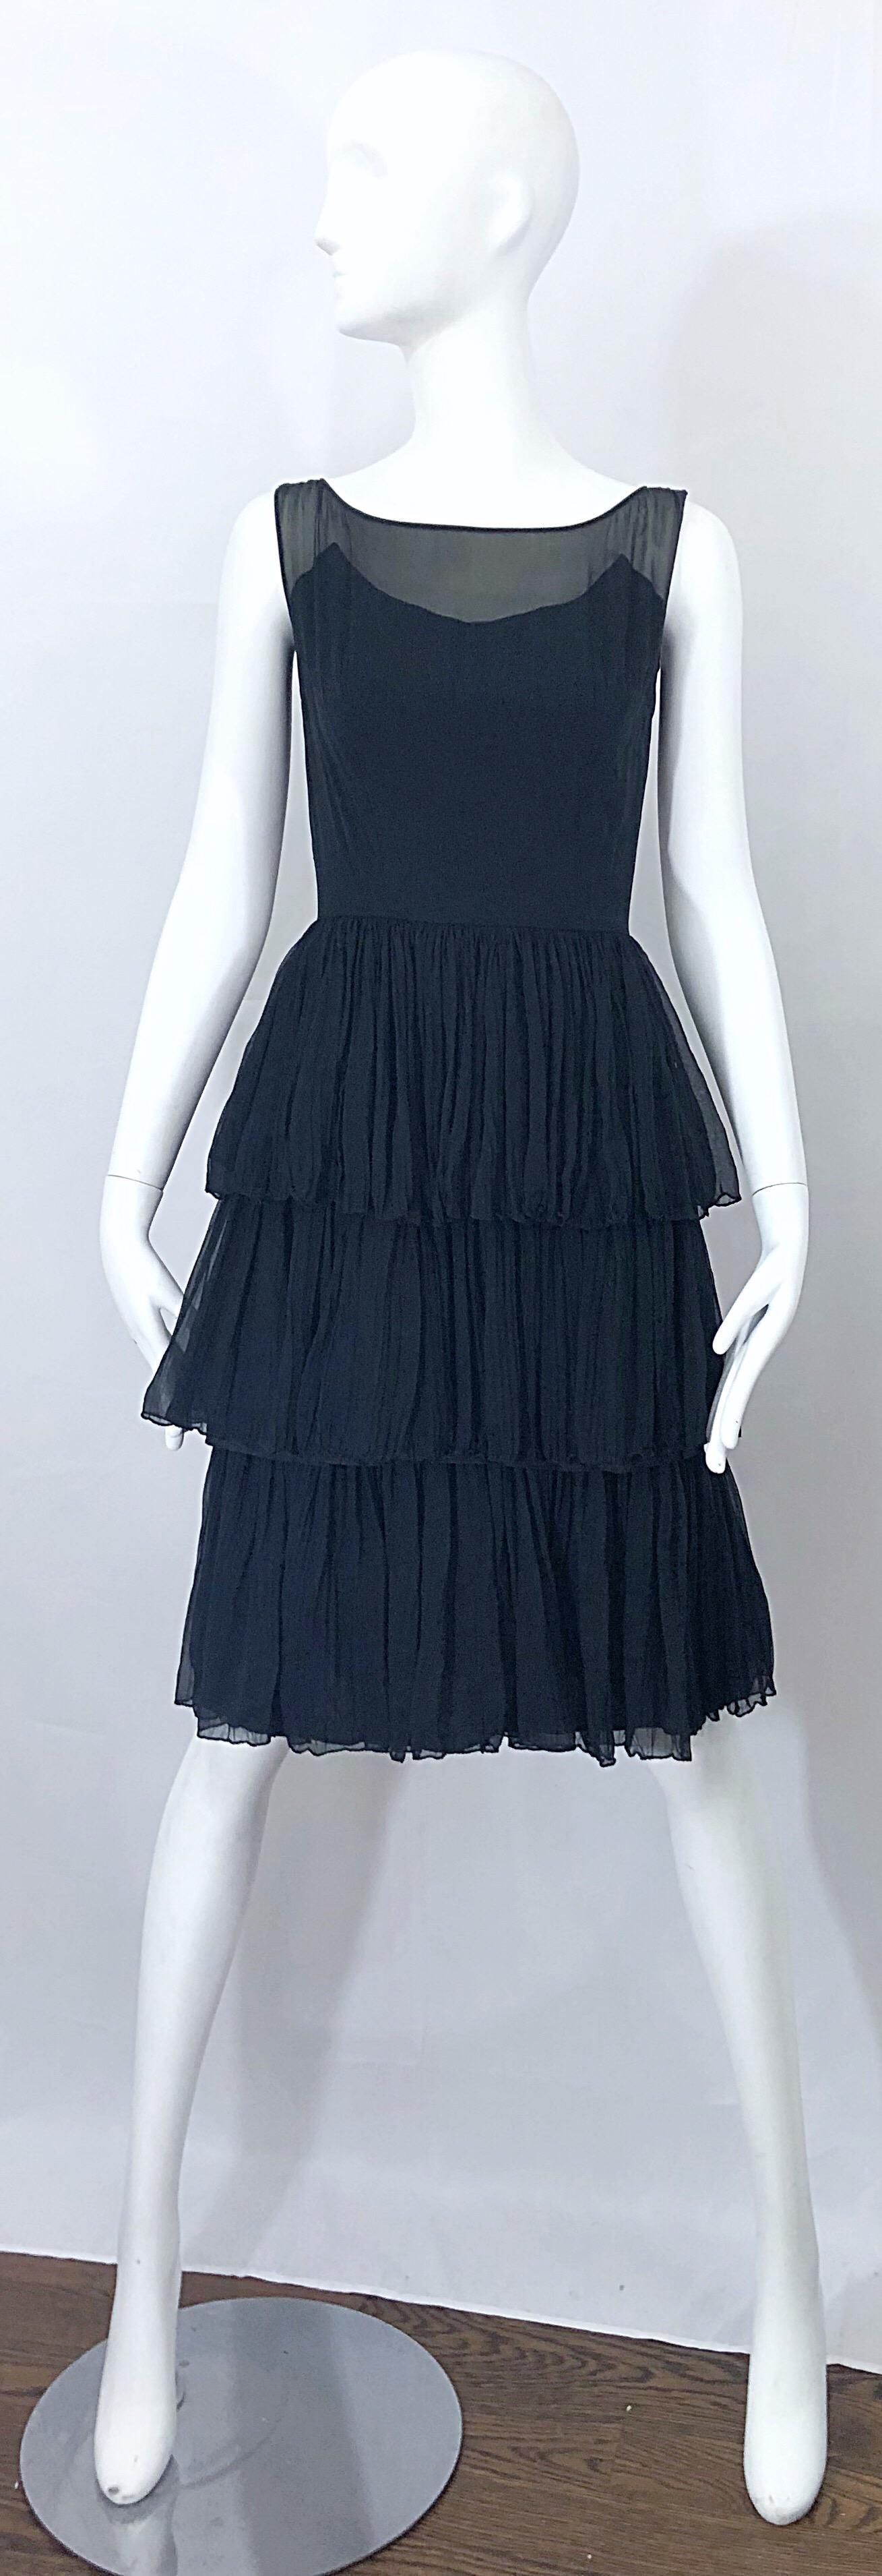 Incredible 1950s SUZY PERETTE black silk chiffon nude illusion couture tiered cocktail dress! Features a black strapless bodice with a sheer chiffon overlay. Three tiers of soft luxurious chiffon. Full metal zipper up the back with hook-and-eye